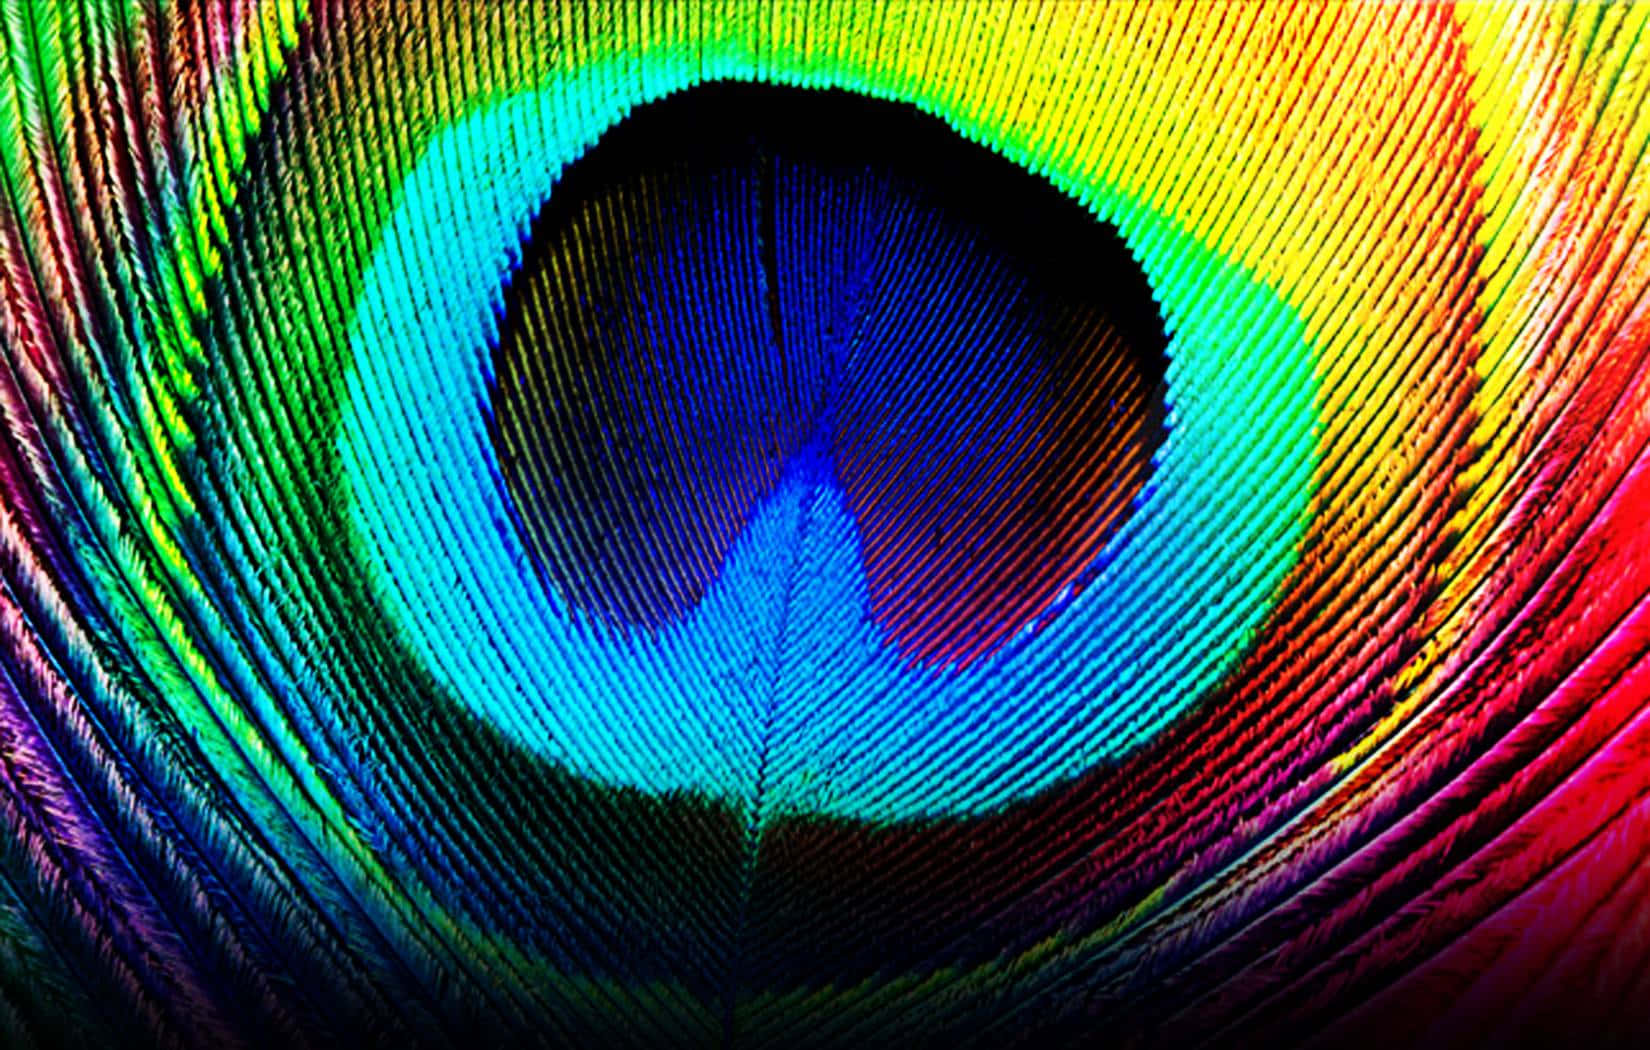 Image  Two Colored Peacock Feather